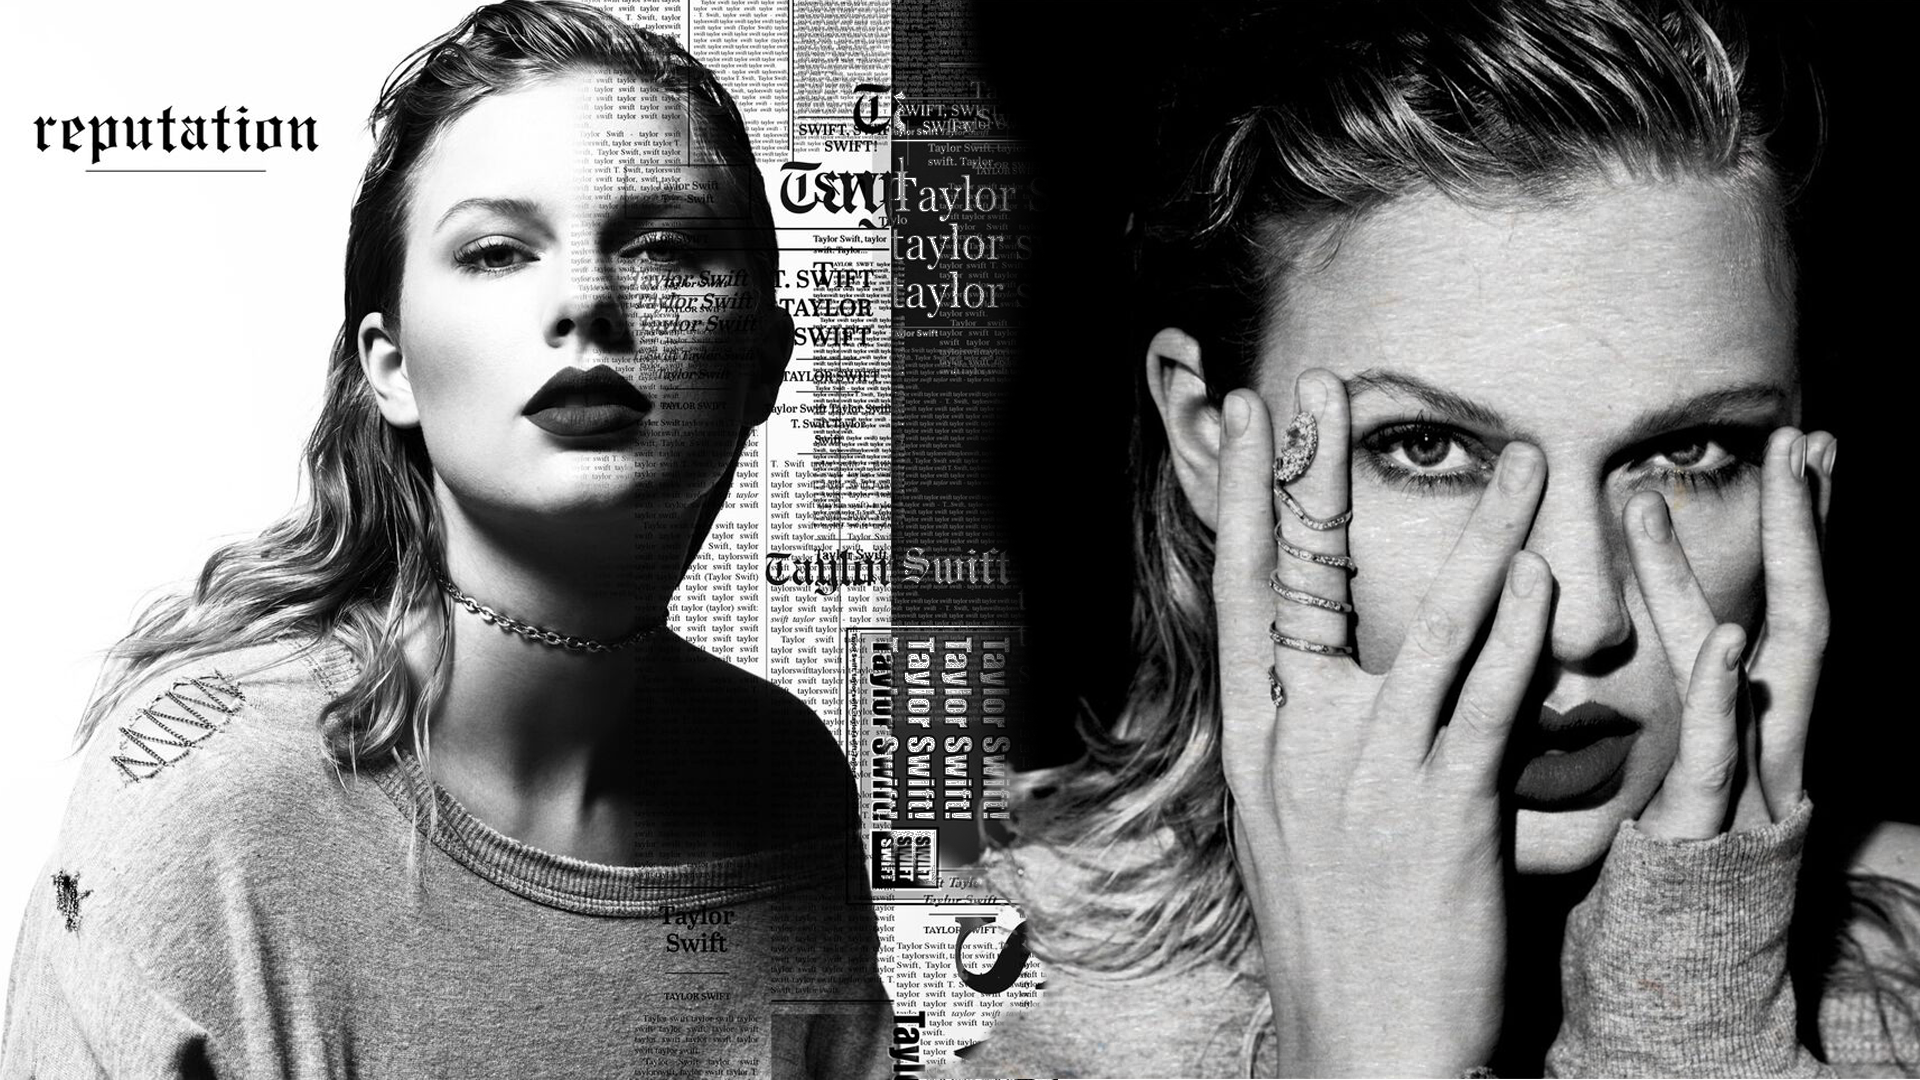 I Miss The Old Taylor: On Taylor Swift's Reputation and Her